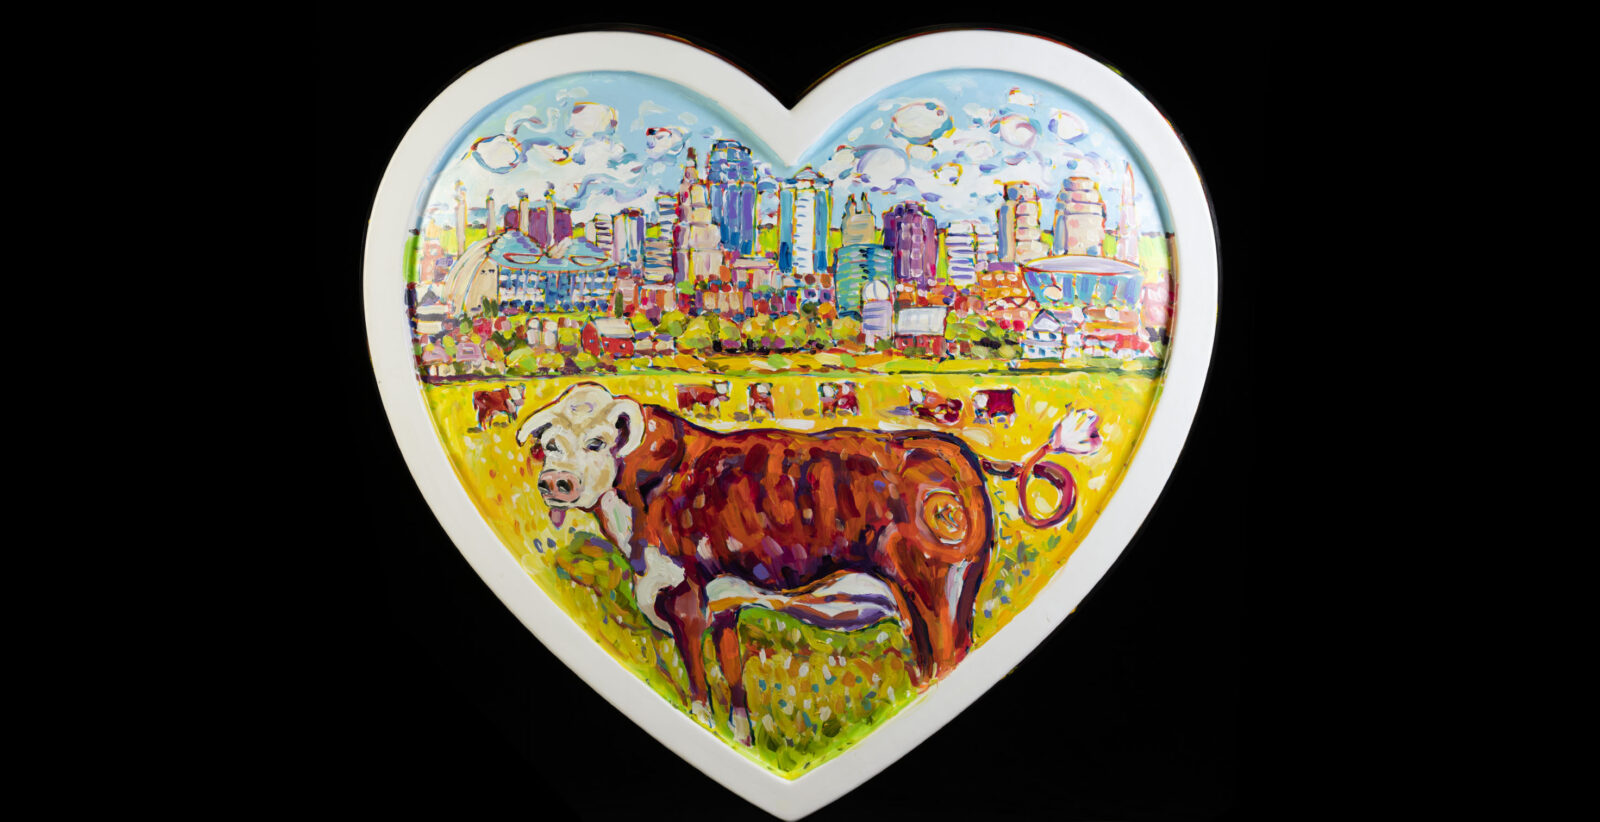 KC. A Cowtown with Heart!